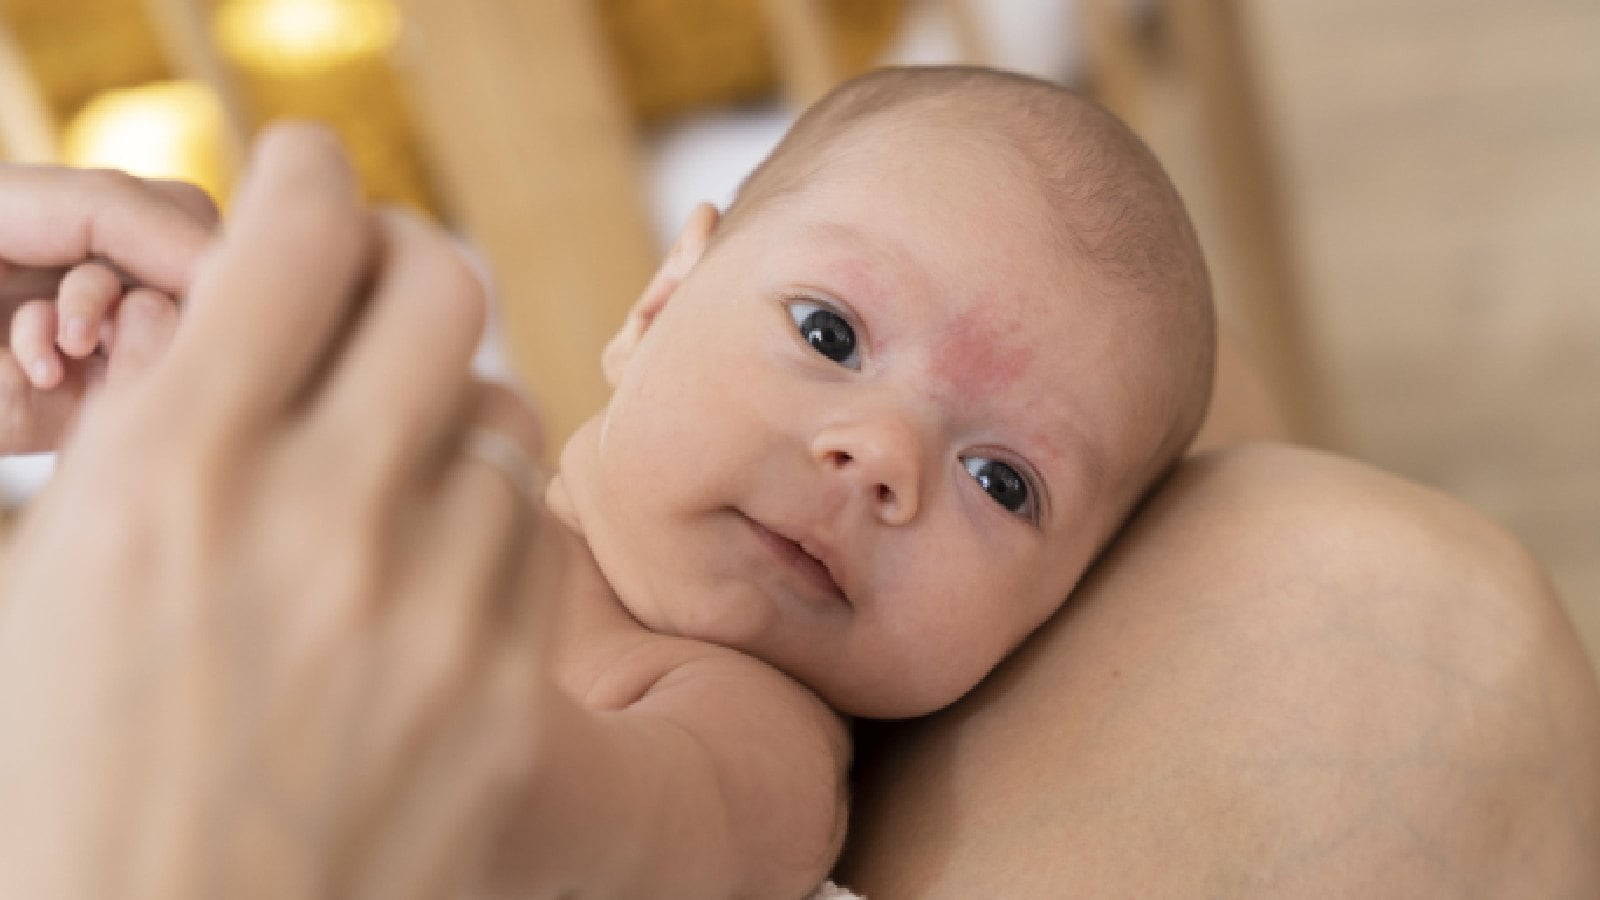 Baby skincare: 9 tips for protecting baby’s skin